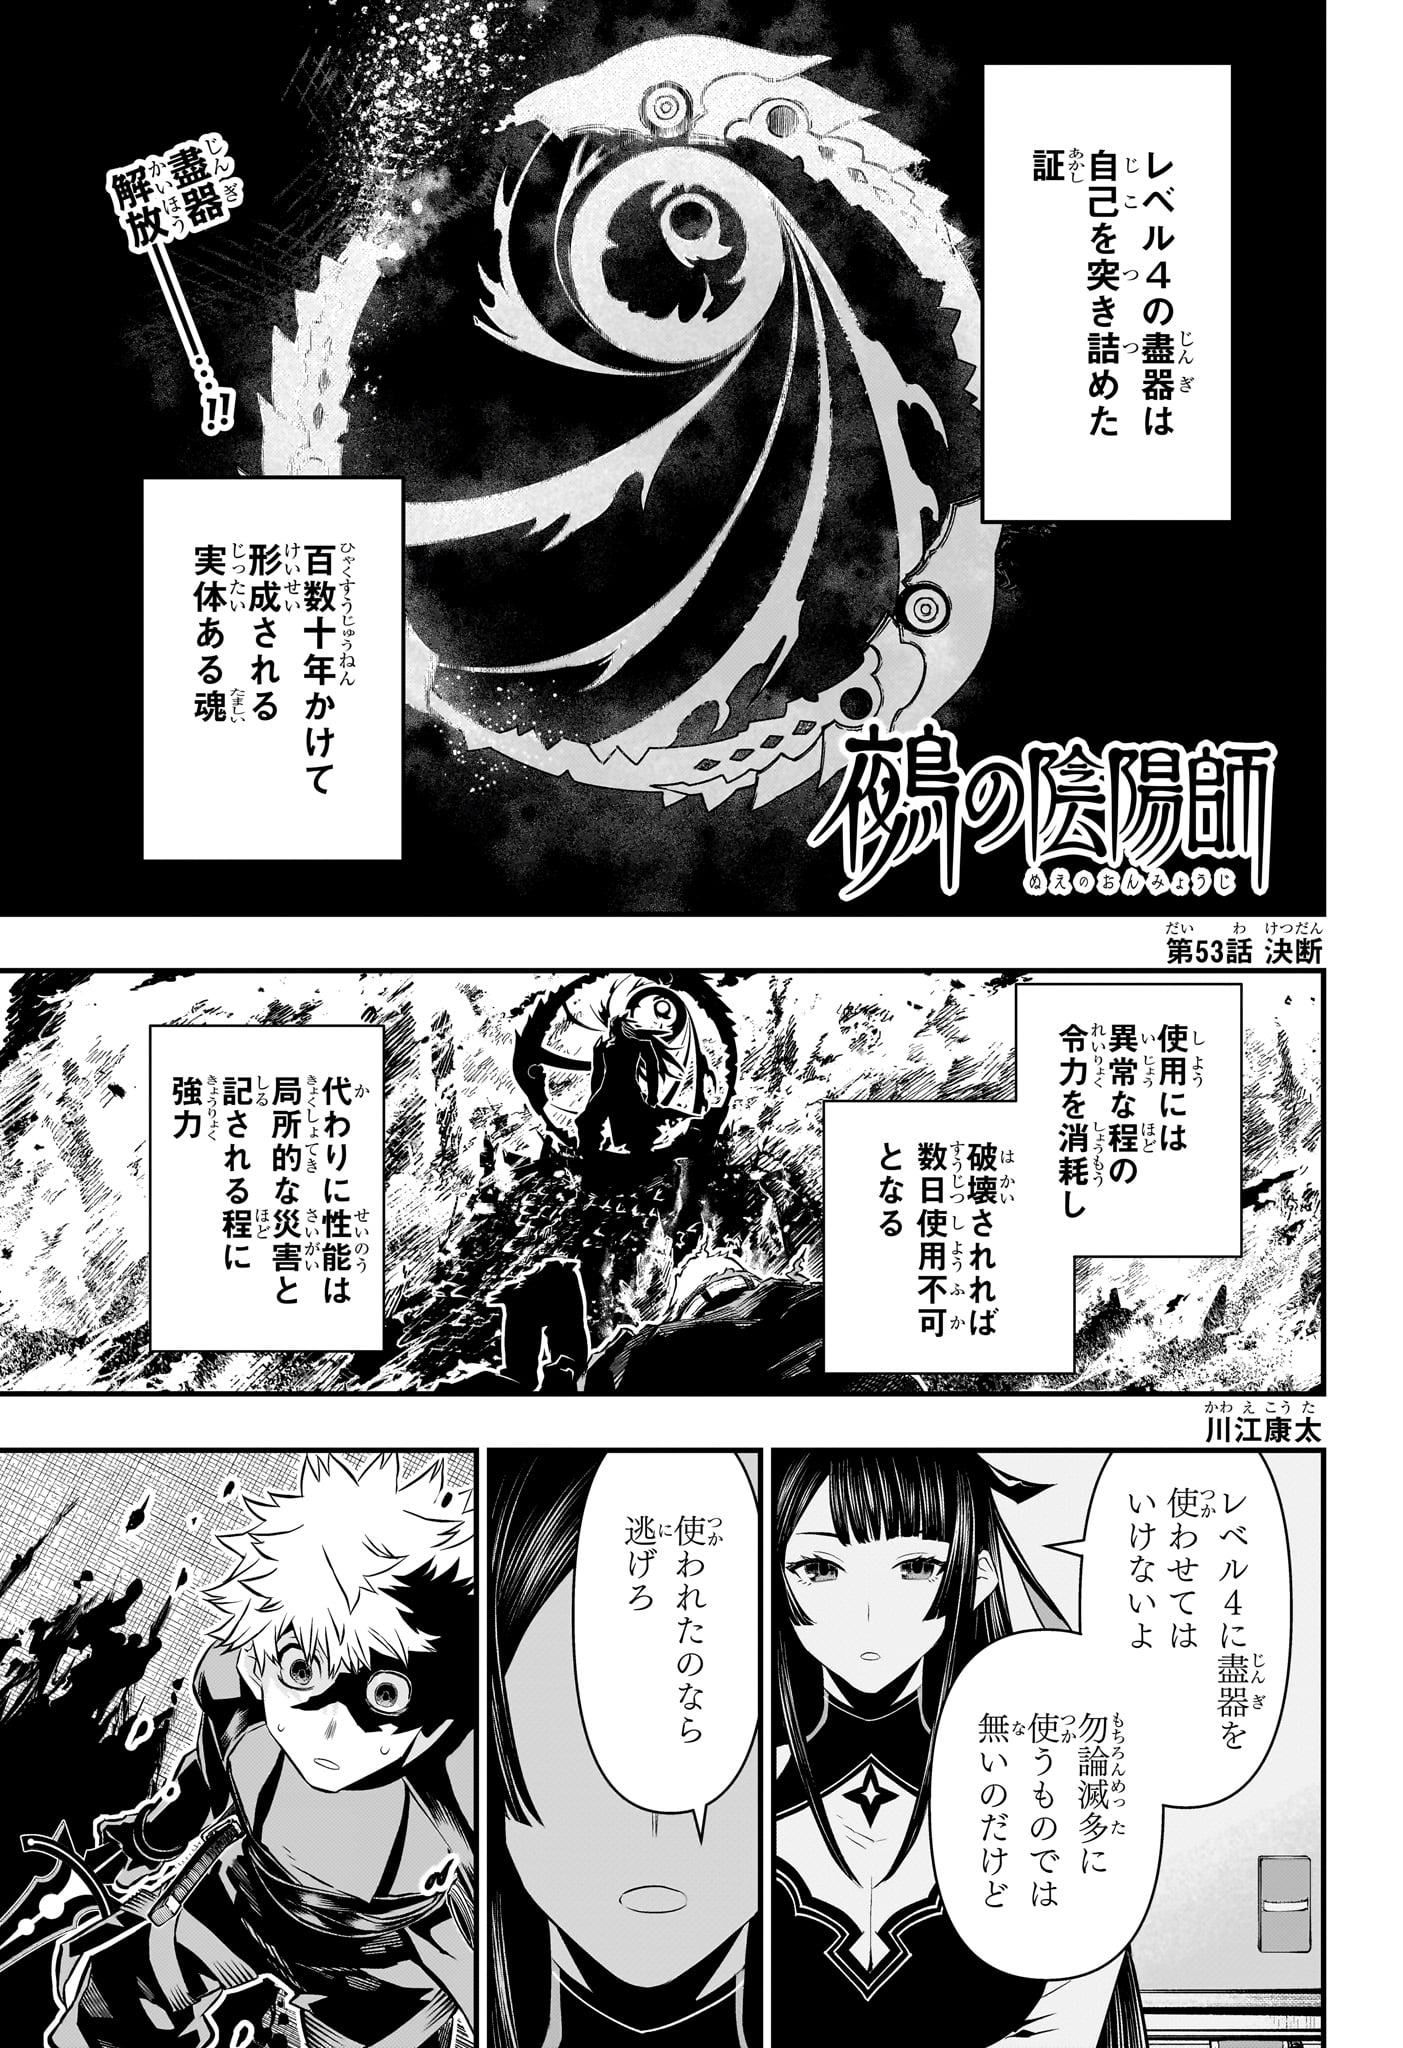 Nue no Onmyouji - Chapter 53 - Page 1